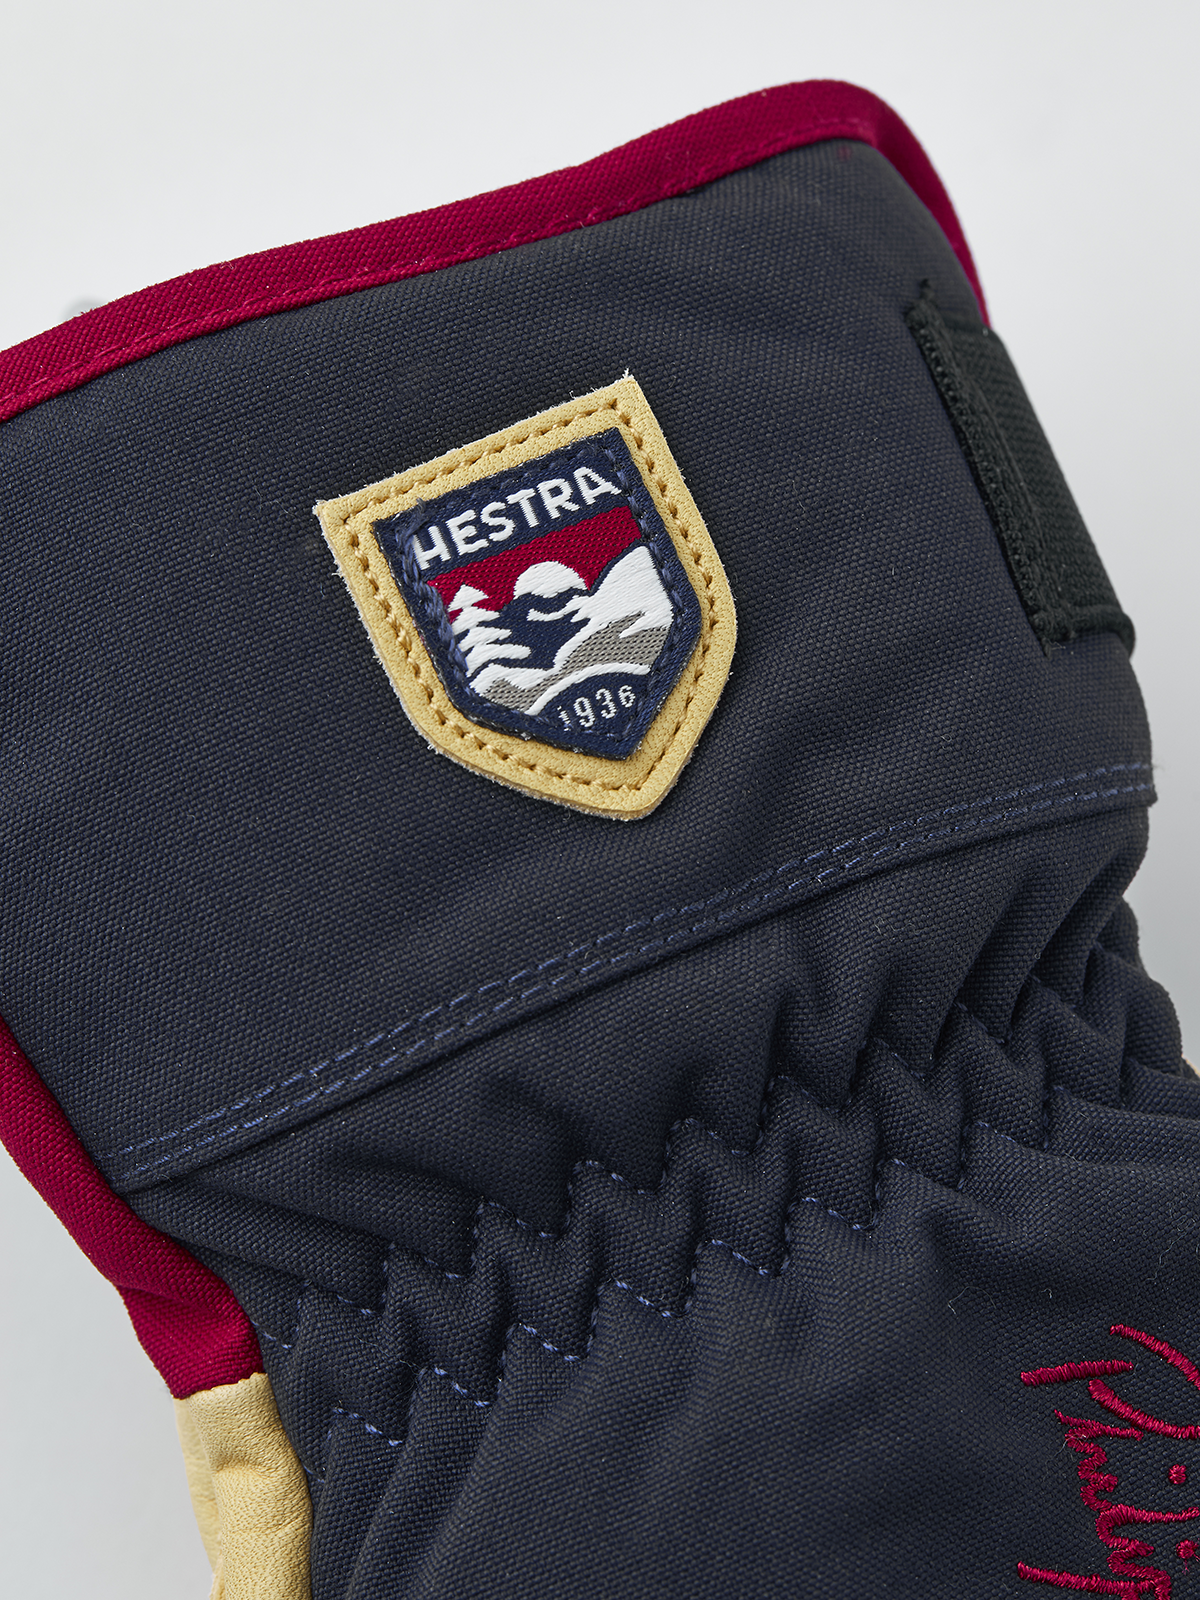 Philippe Raoux Ecocuir Short - Navy | Hestra Gloves